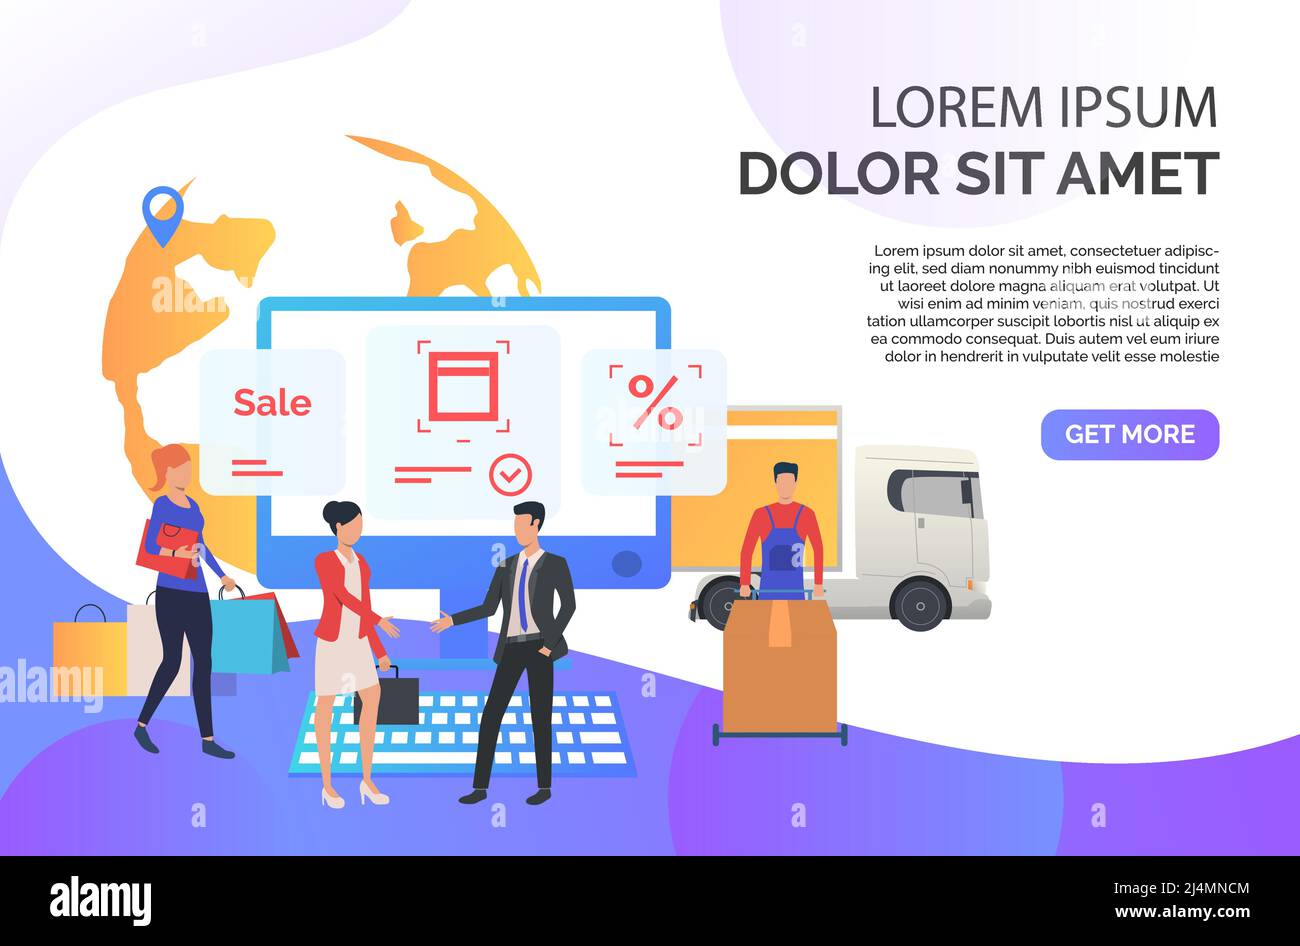 Sales agent working with customers in internet store. Sale, special offer, deal. Online shop concept. Vector illustration for presentation slide, post Stock Vector